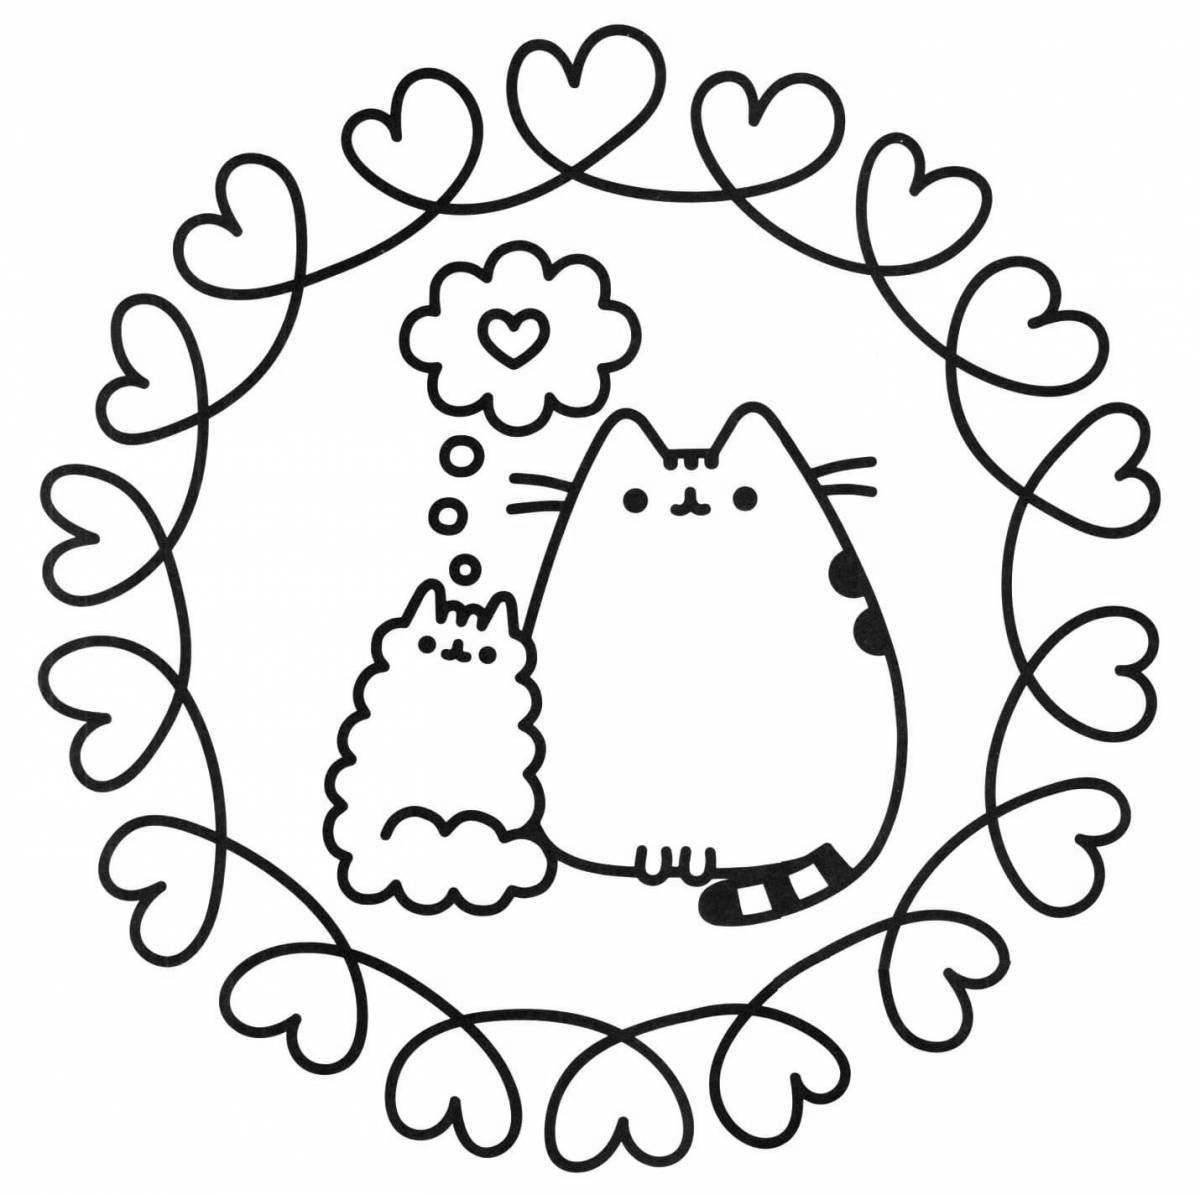 Coloring page affectionate chubby cat